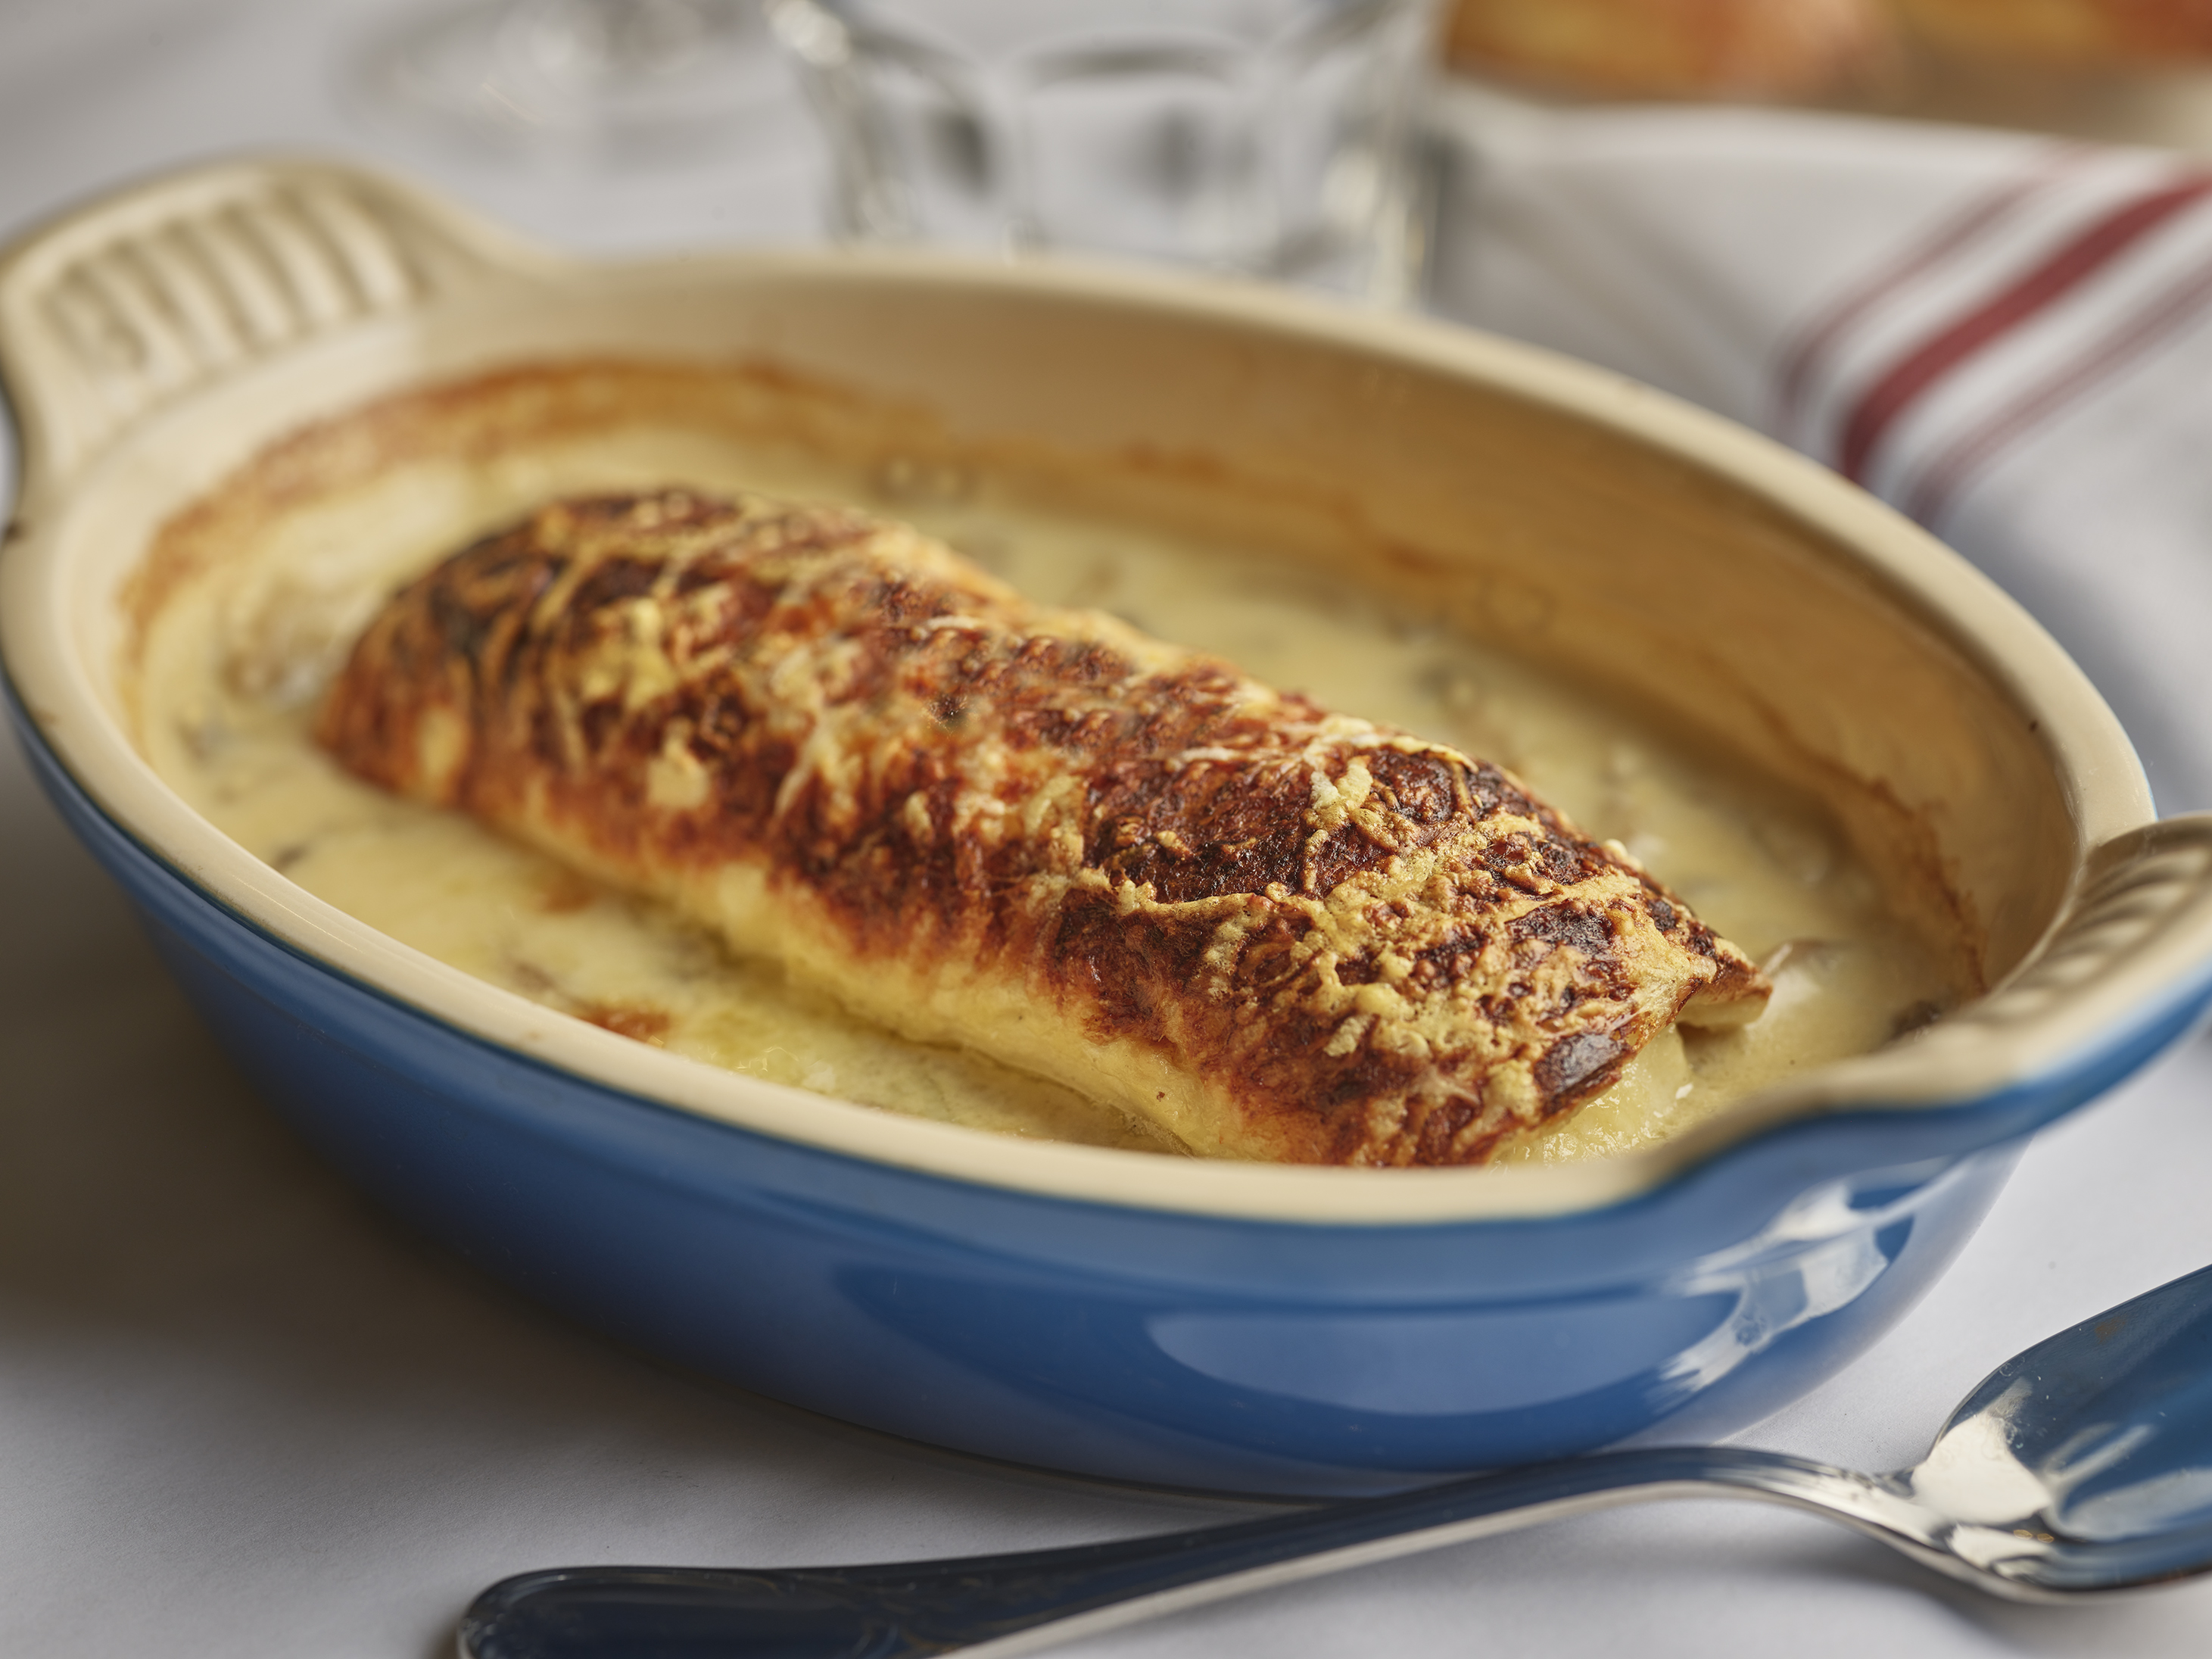 A blue oval dish filled with one long quenelle with a burnt top, sitting in a creamy white sauce.